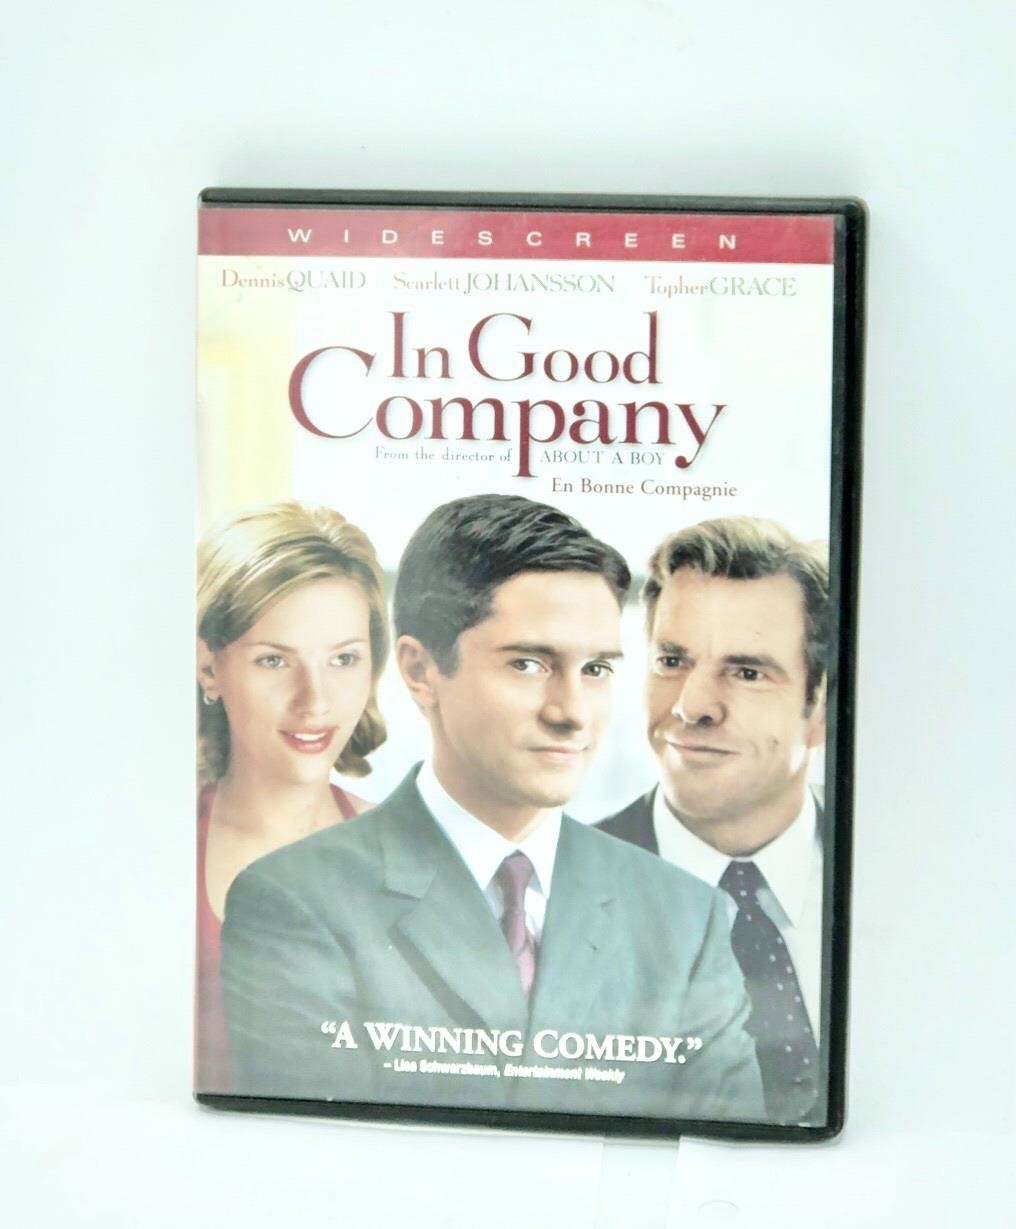 In Good Company widescreen DVD previously viewed